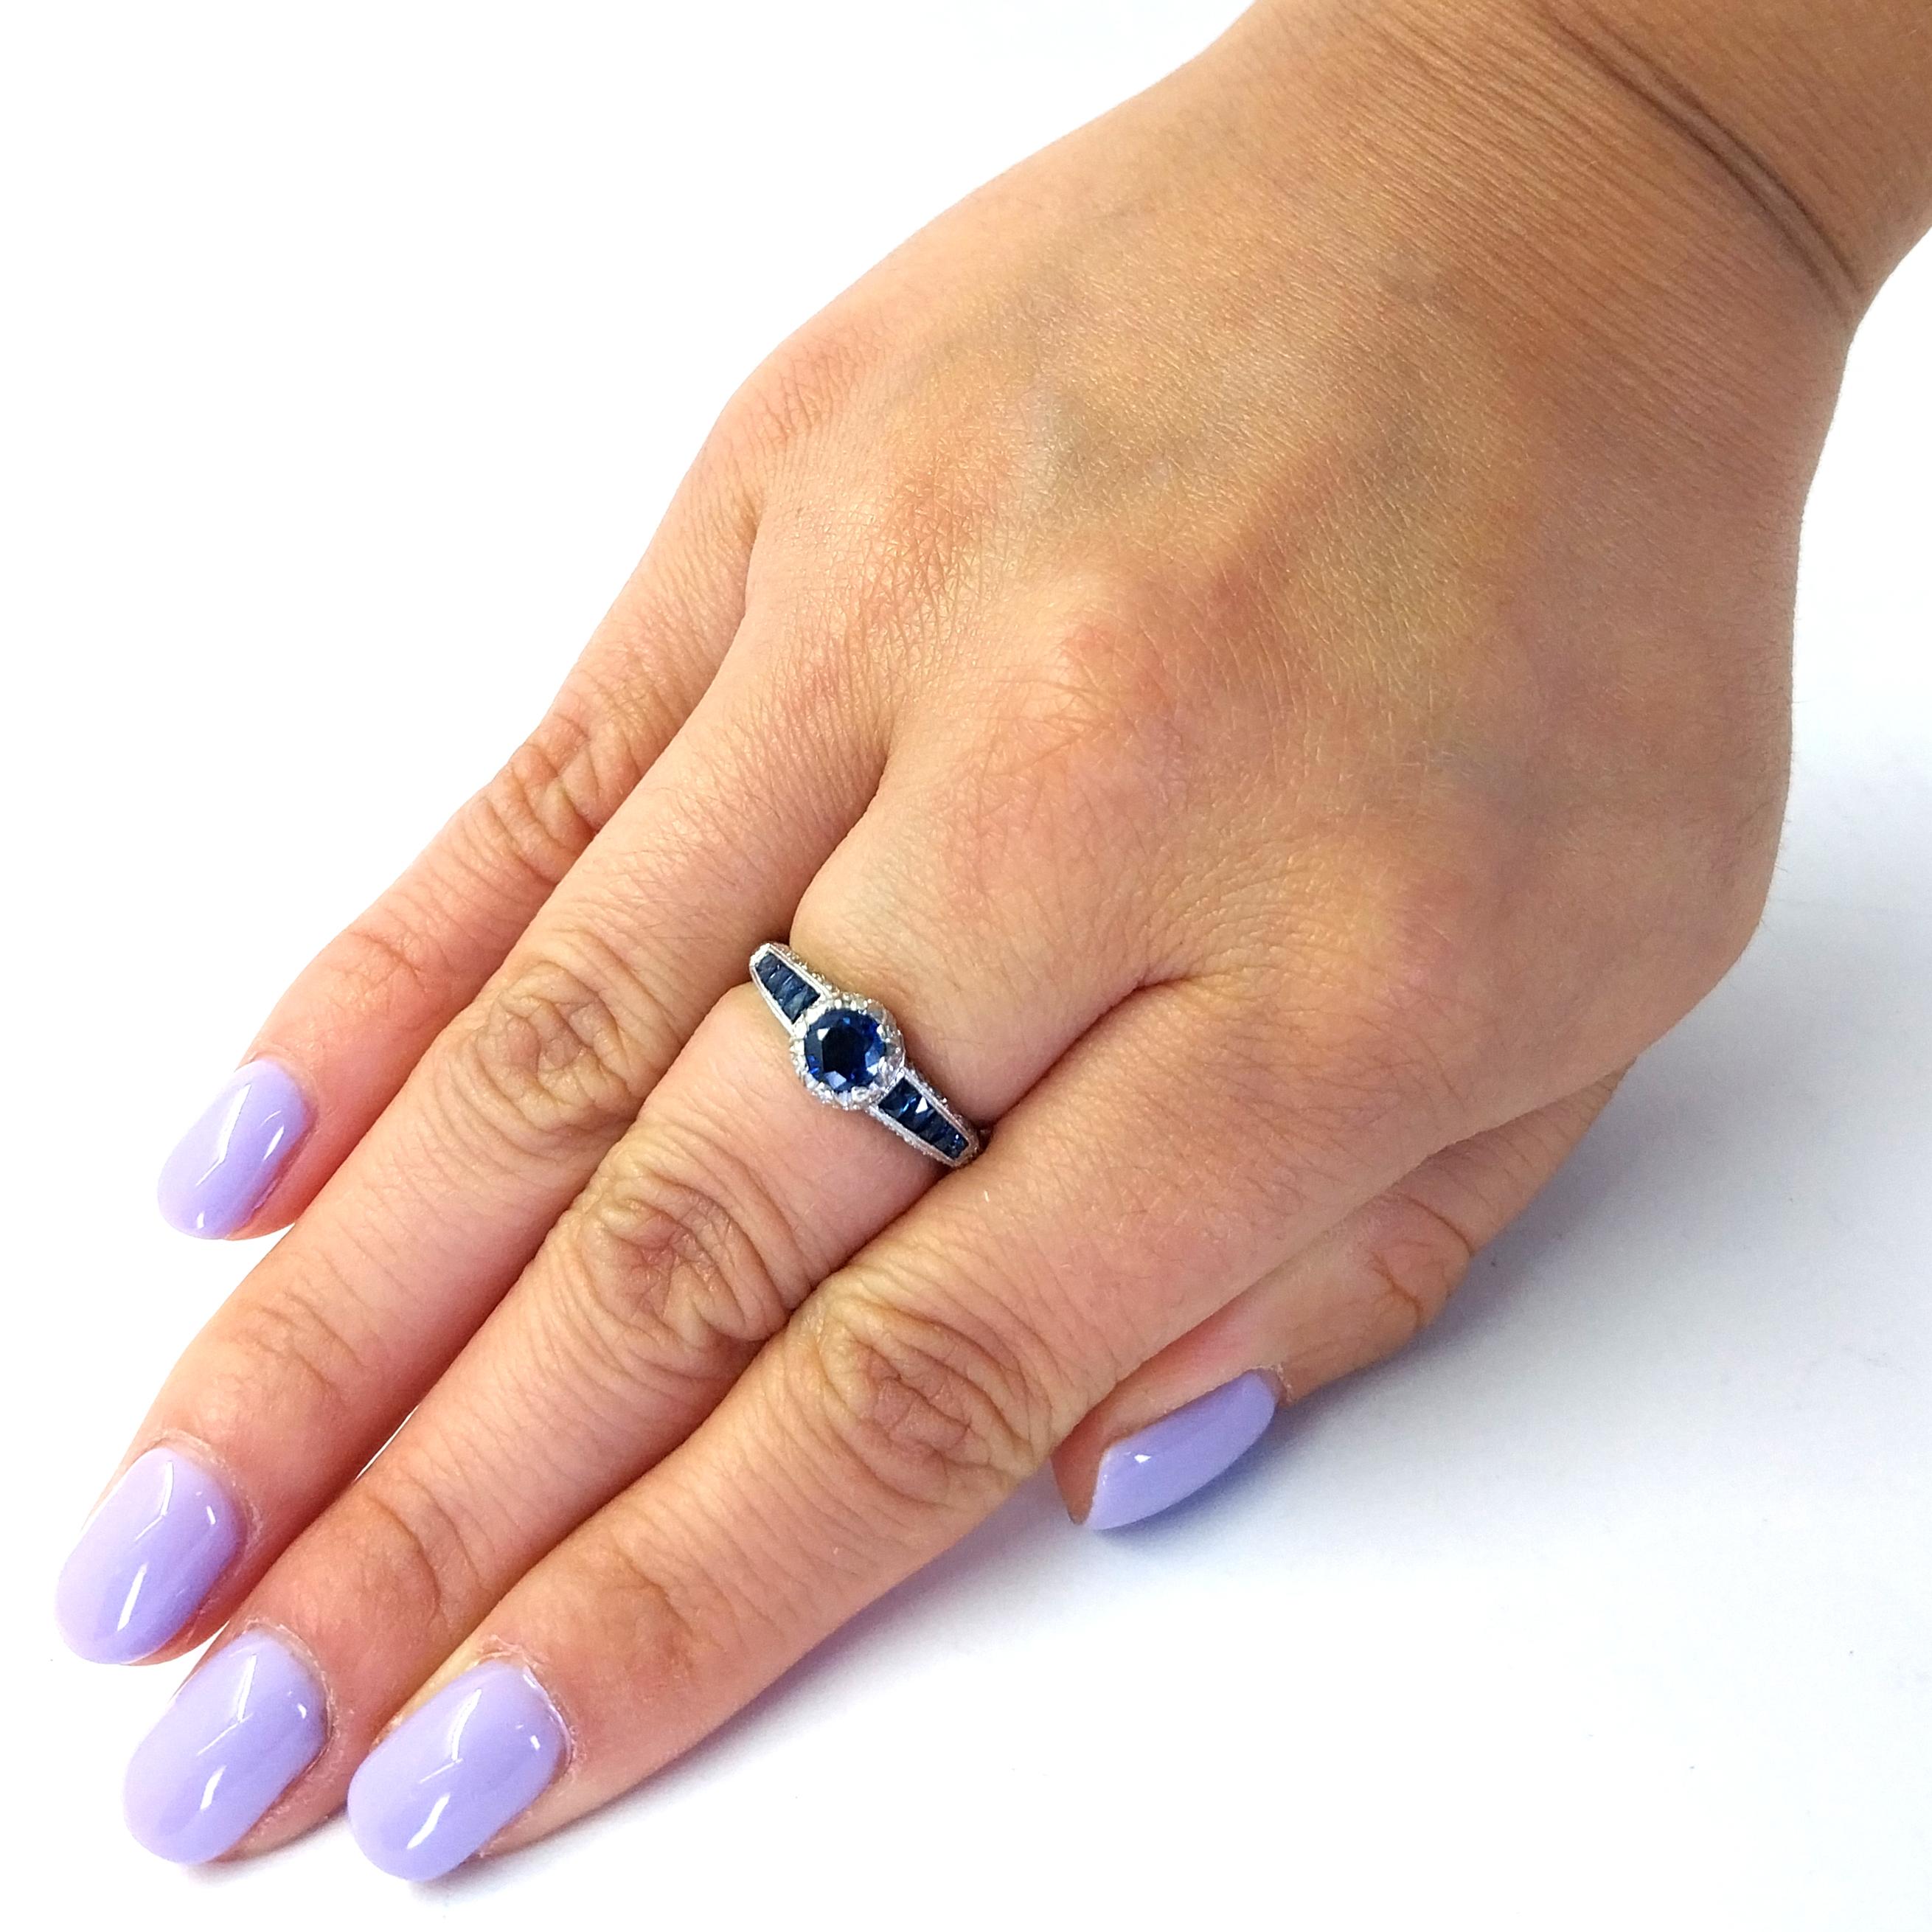 18 Karat White Gold Ring Featuring 11 Round and Calibre Cut Sapphires Totaling Approximately 0.75 Carats Accented by 36 Round Brilliant Cut Diamonds of VS Clarity and G Color Totaling Approximately 0.25 Carats. Three Sided Design with Millgrain and